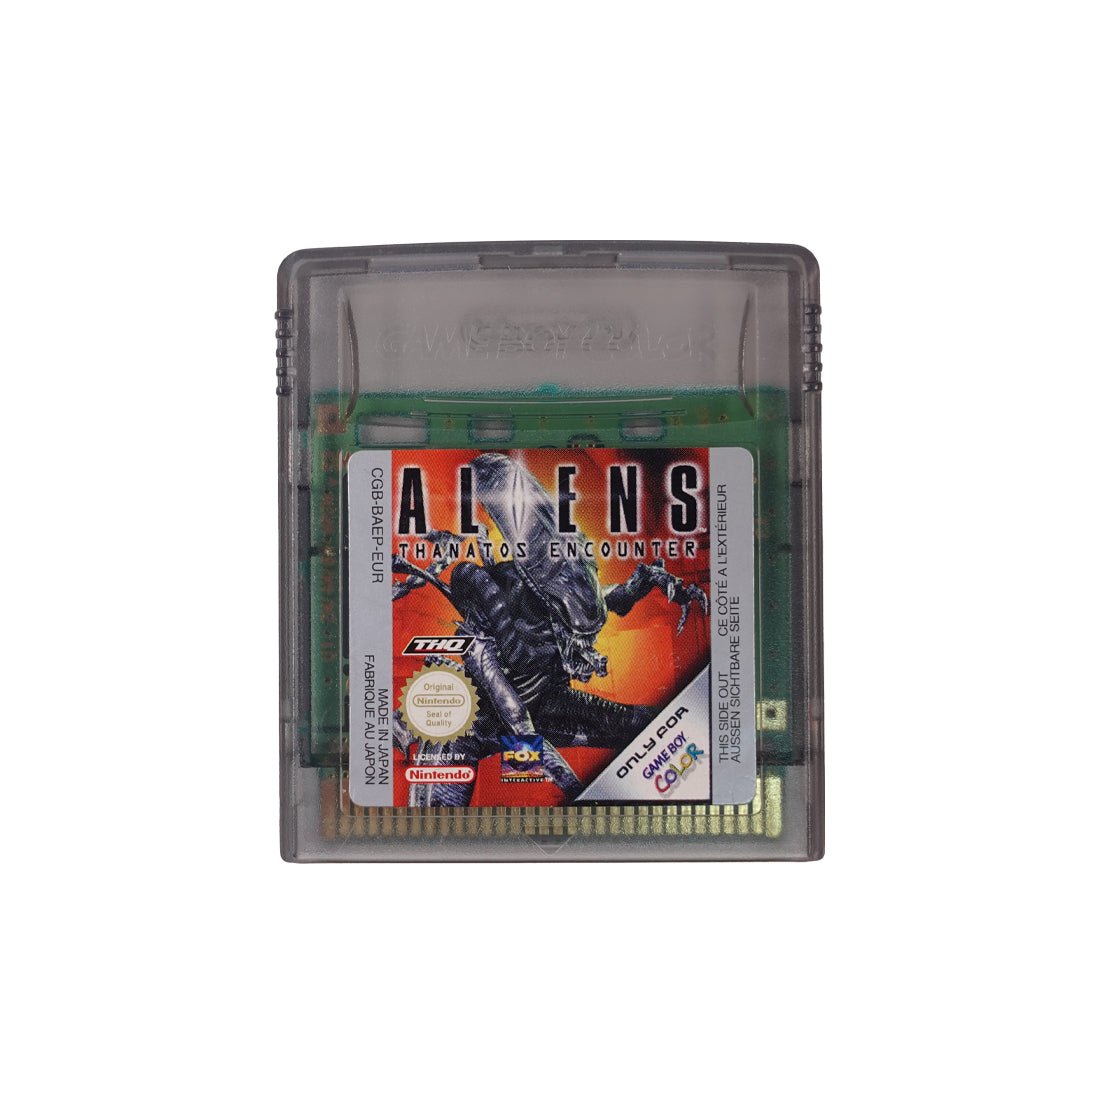 (Pre-Owned) Aliens: Thanatos Encounter - Gameboy Classic - Store 974 | ستور ٩٧٤